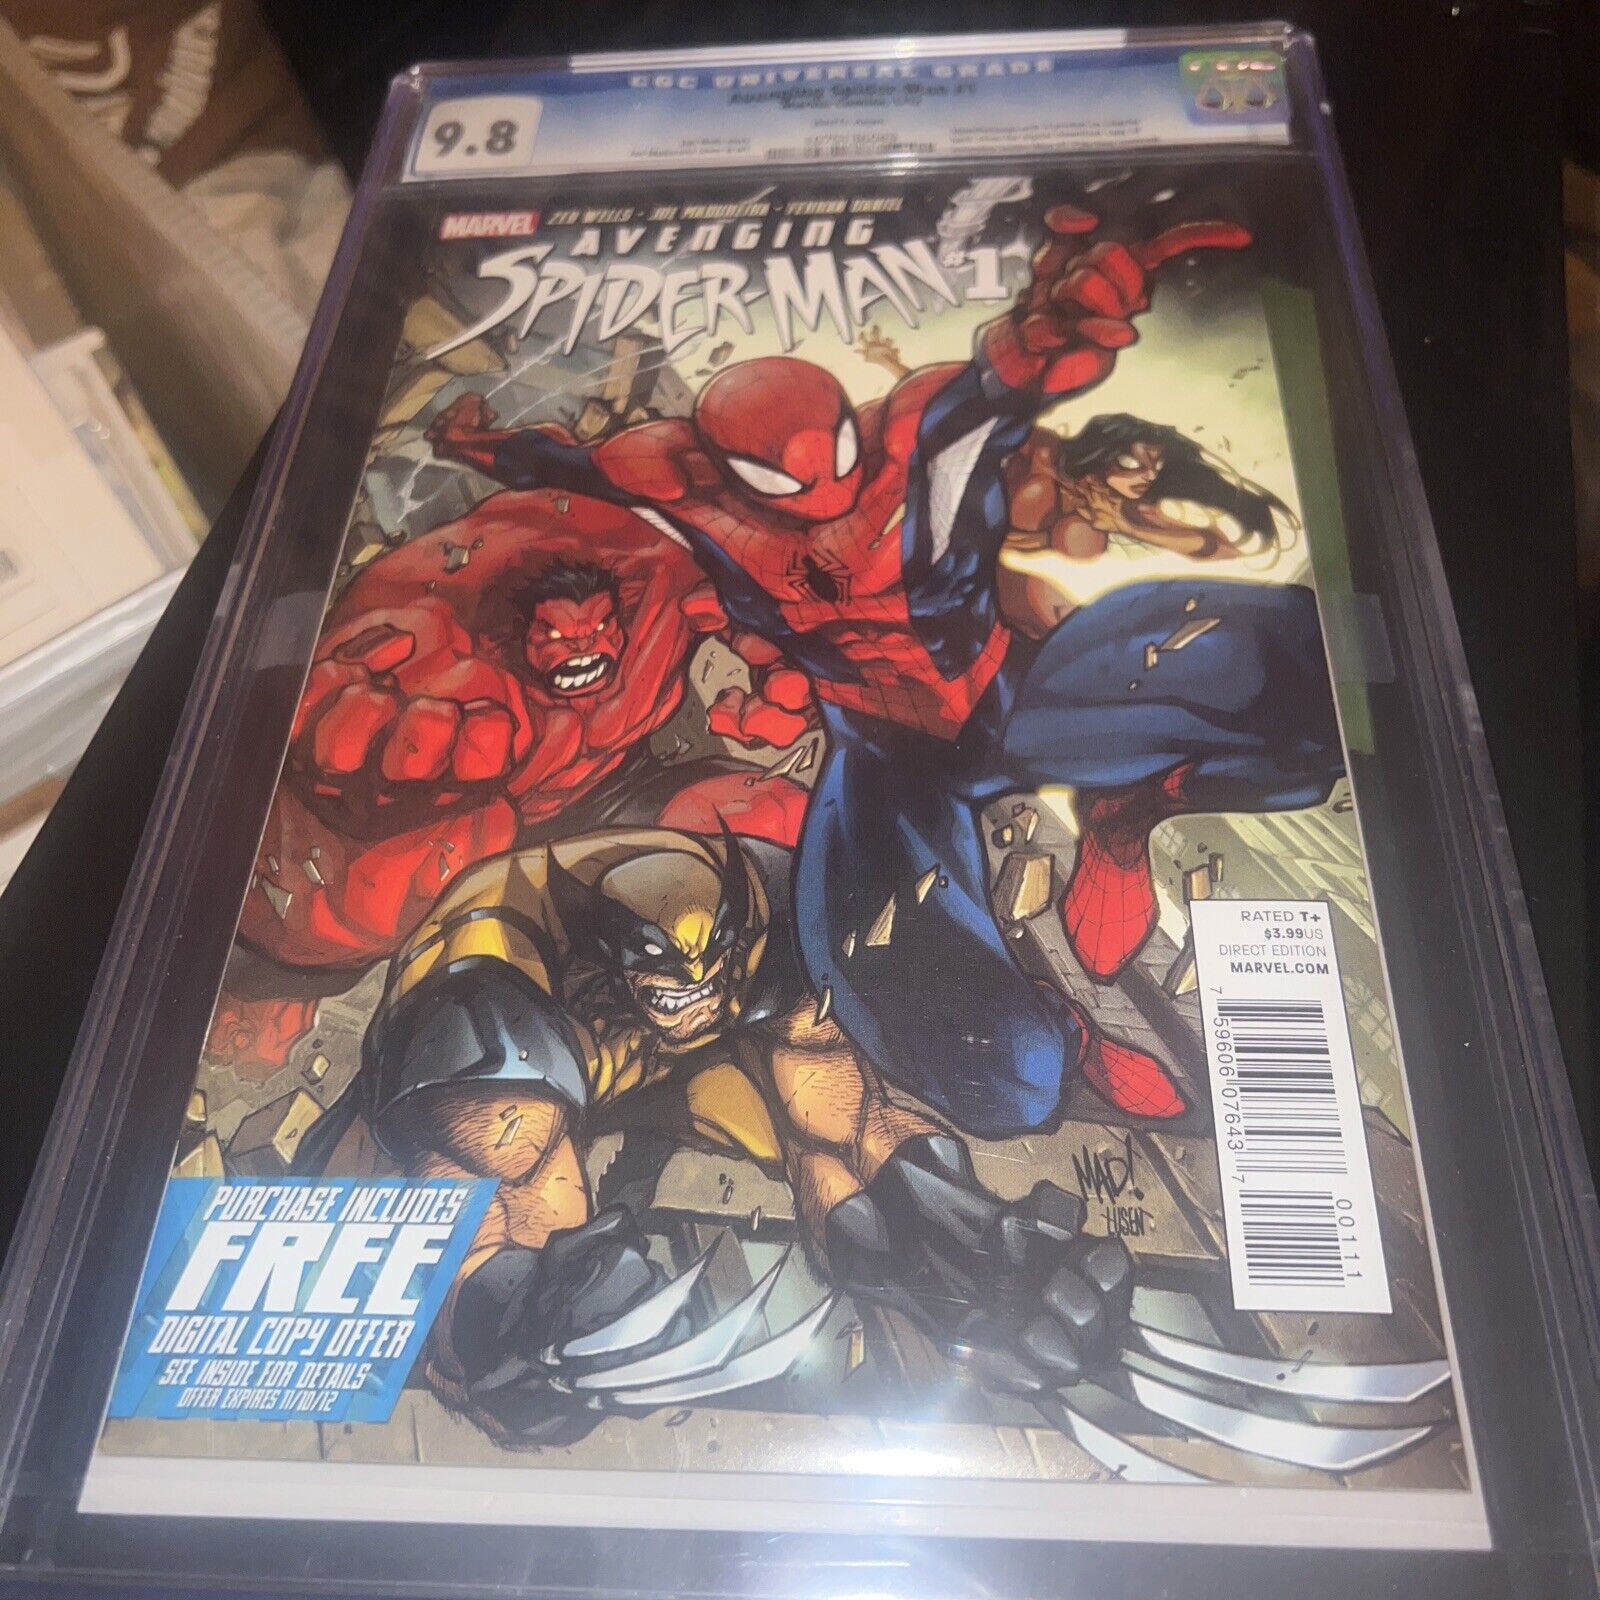 Avenging Spider-Man #1 2012 CGC 9.8 White Pages